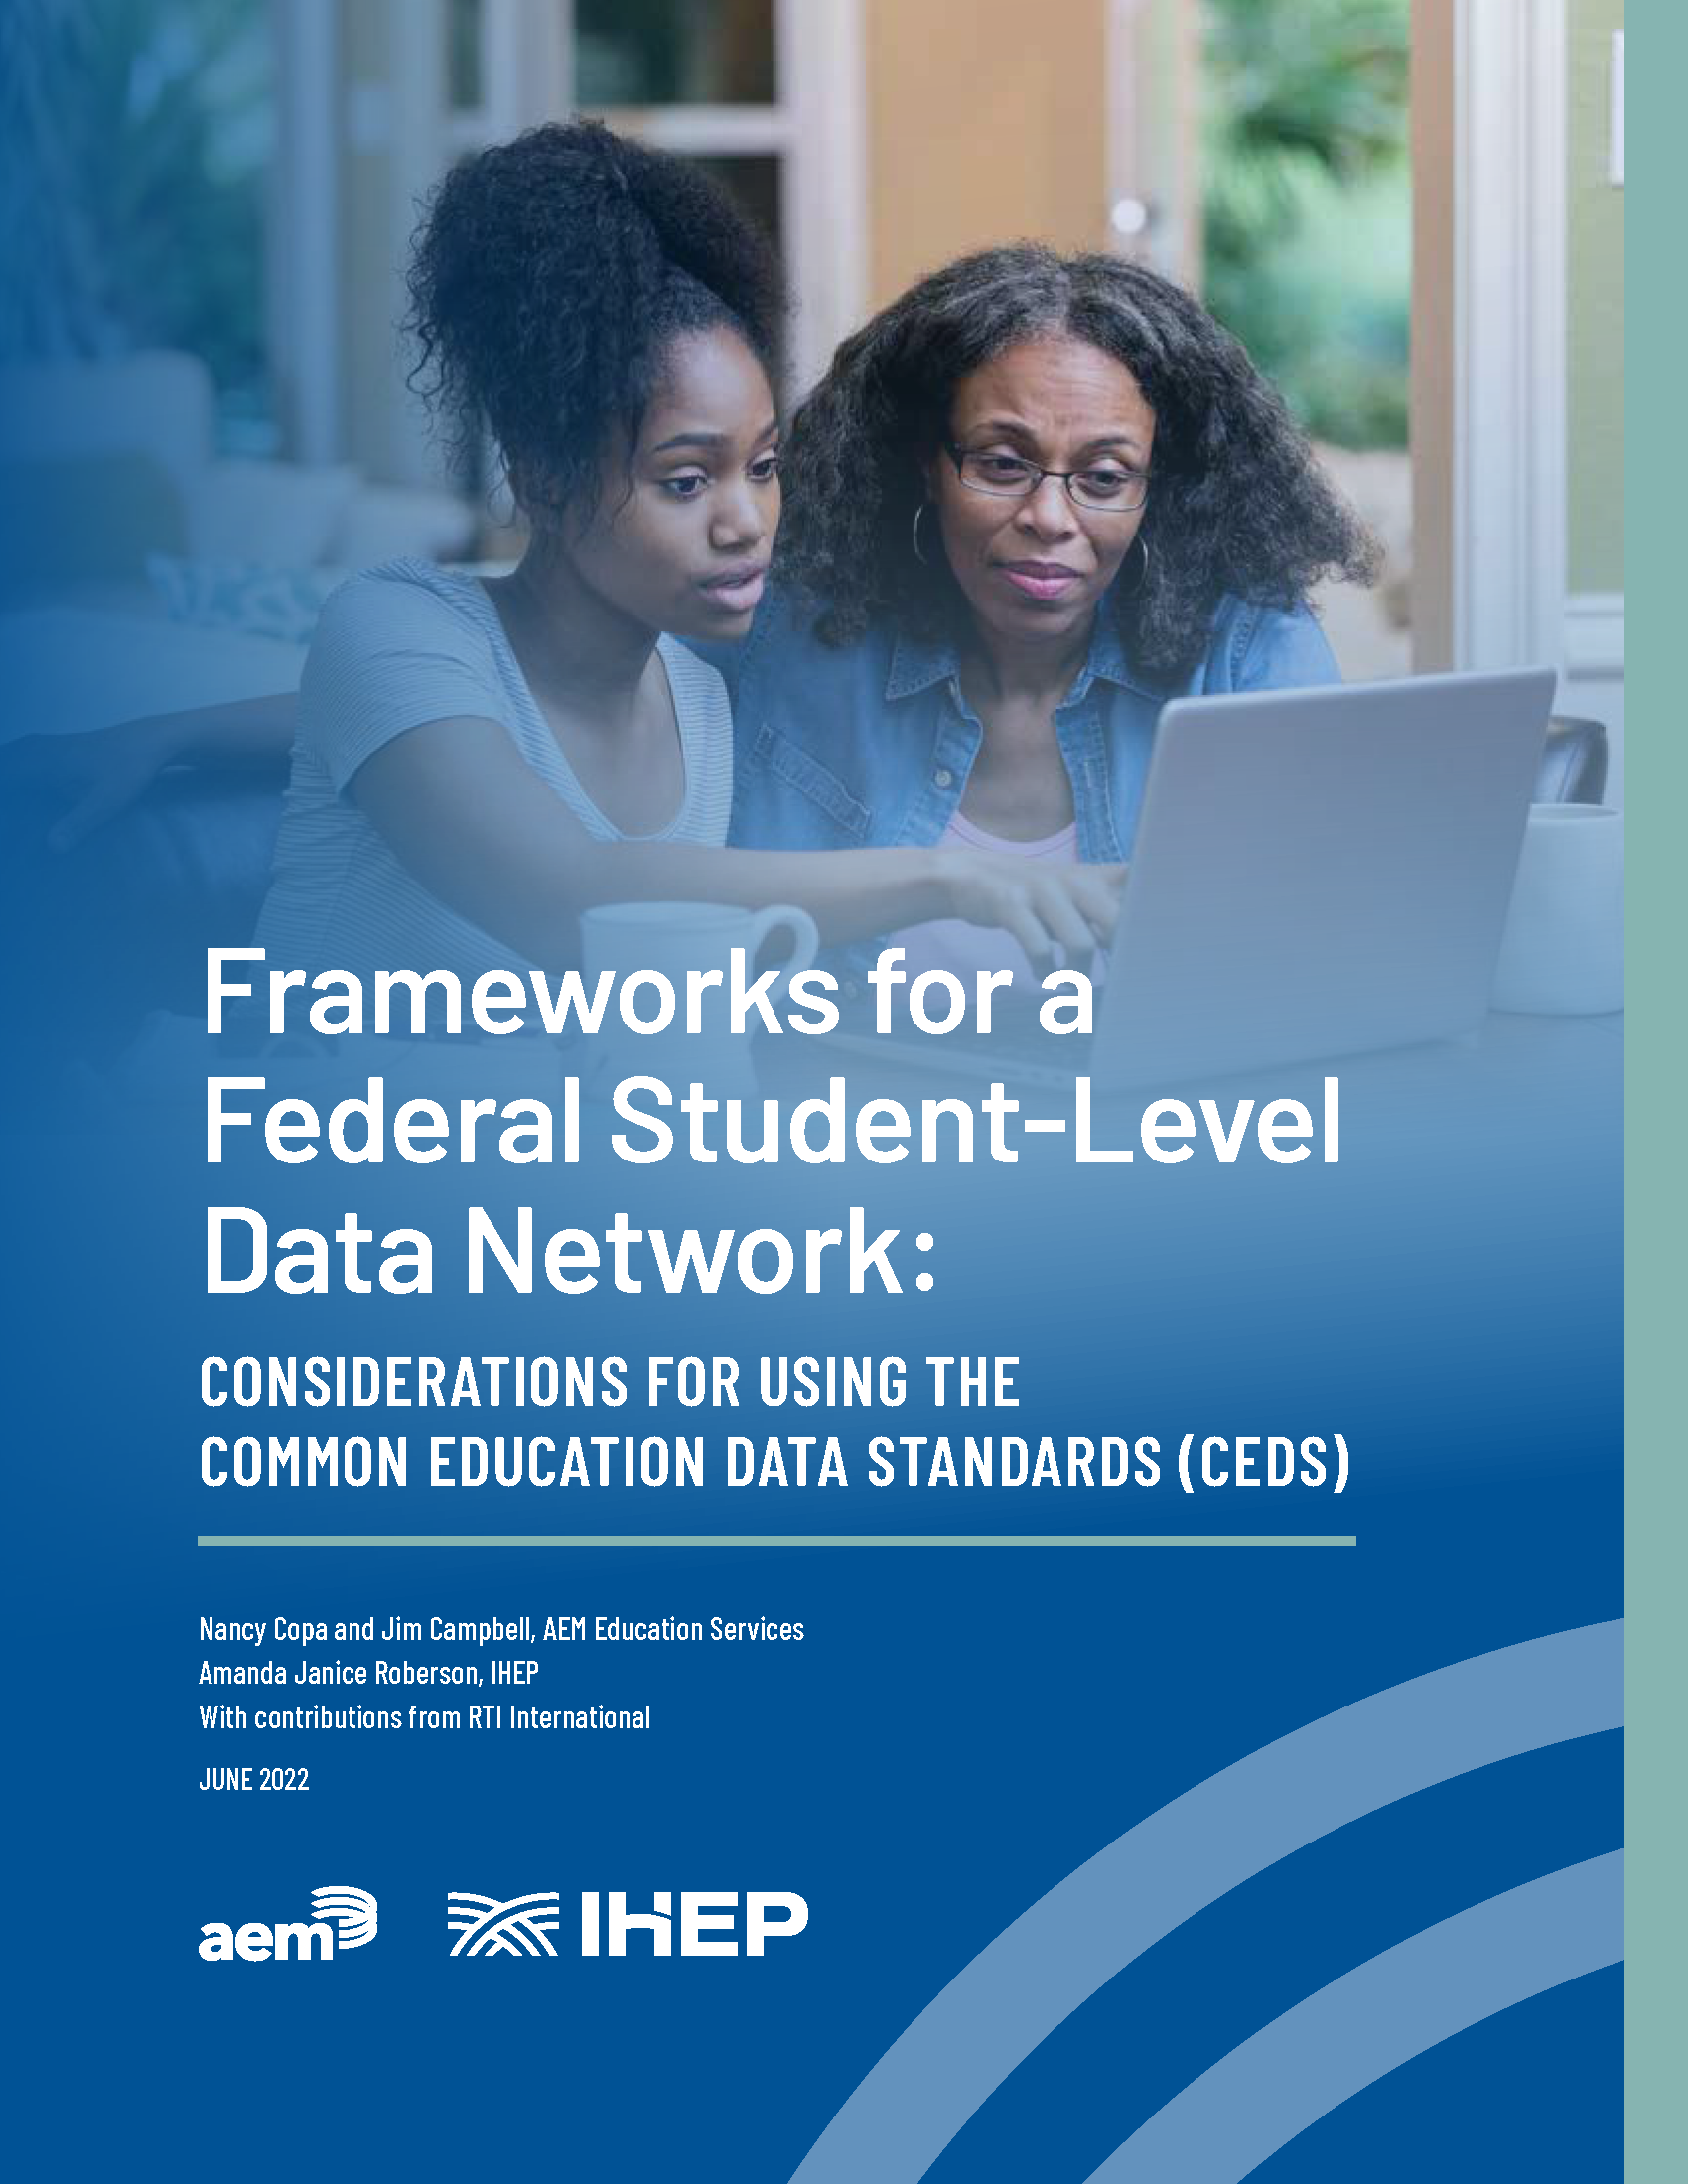 Frameworks for a Federal Student-Level Data Network: Considerations for Using CEDS